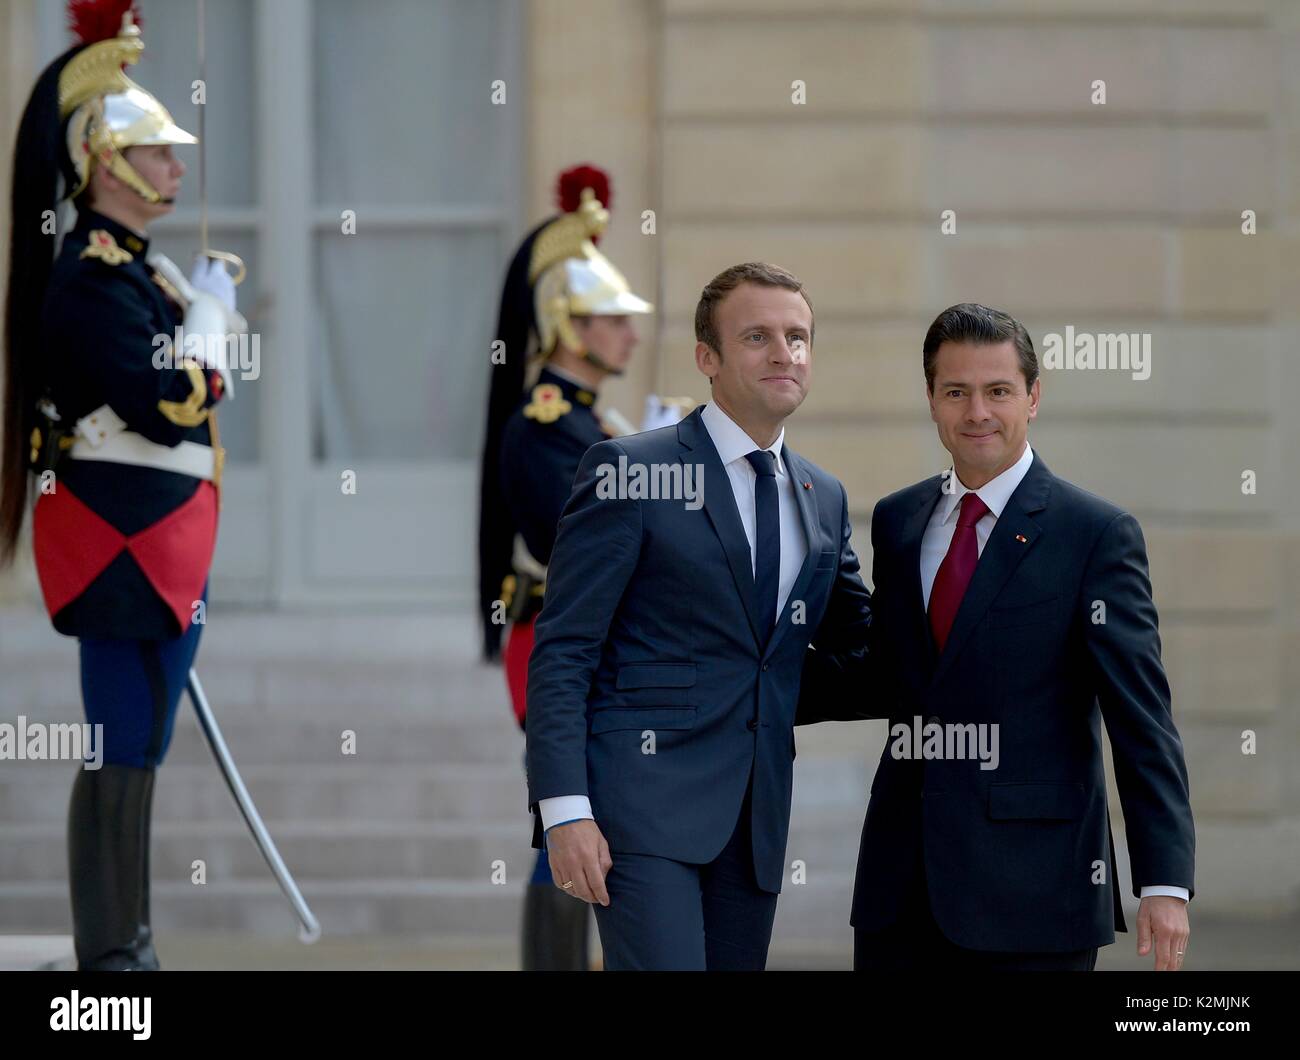 French President Emmanuel Macron welcomes Mexican President Enrique Pena Nieto, right, to the Elysee Palace for meeting July 7, 2017 in Paris, France. Stock Photo